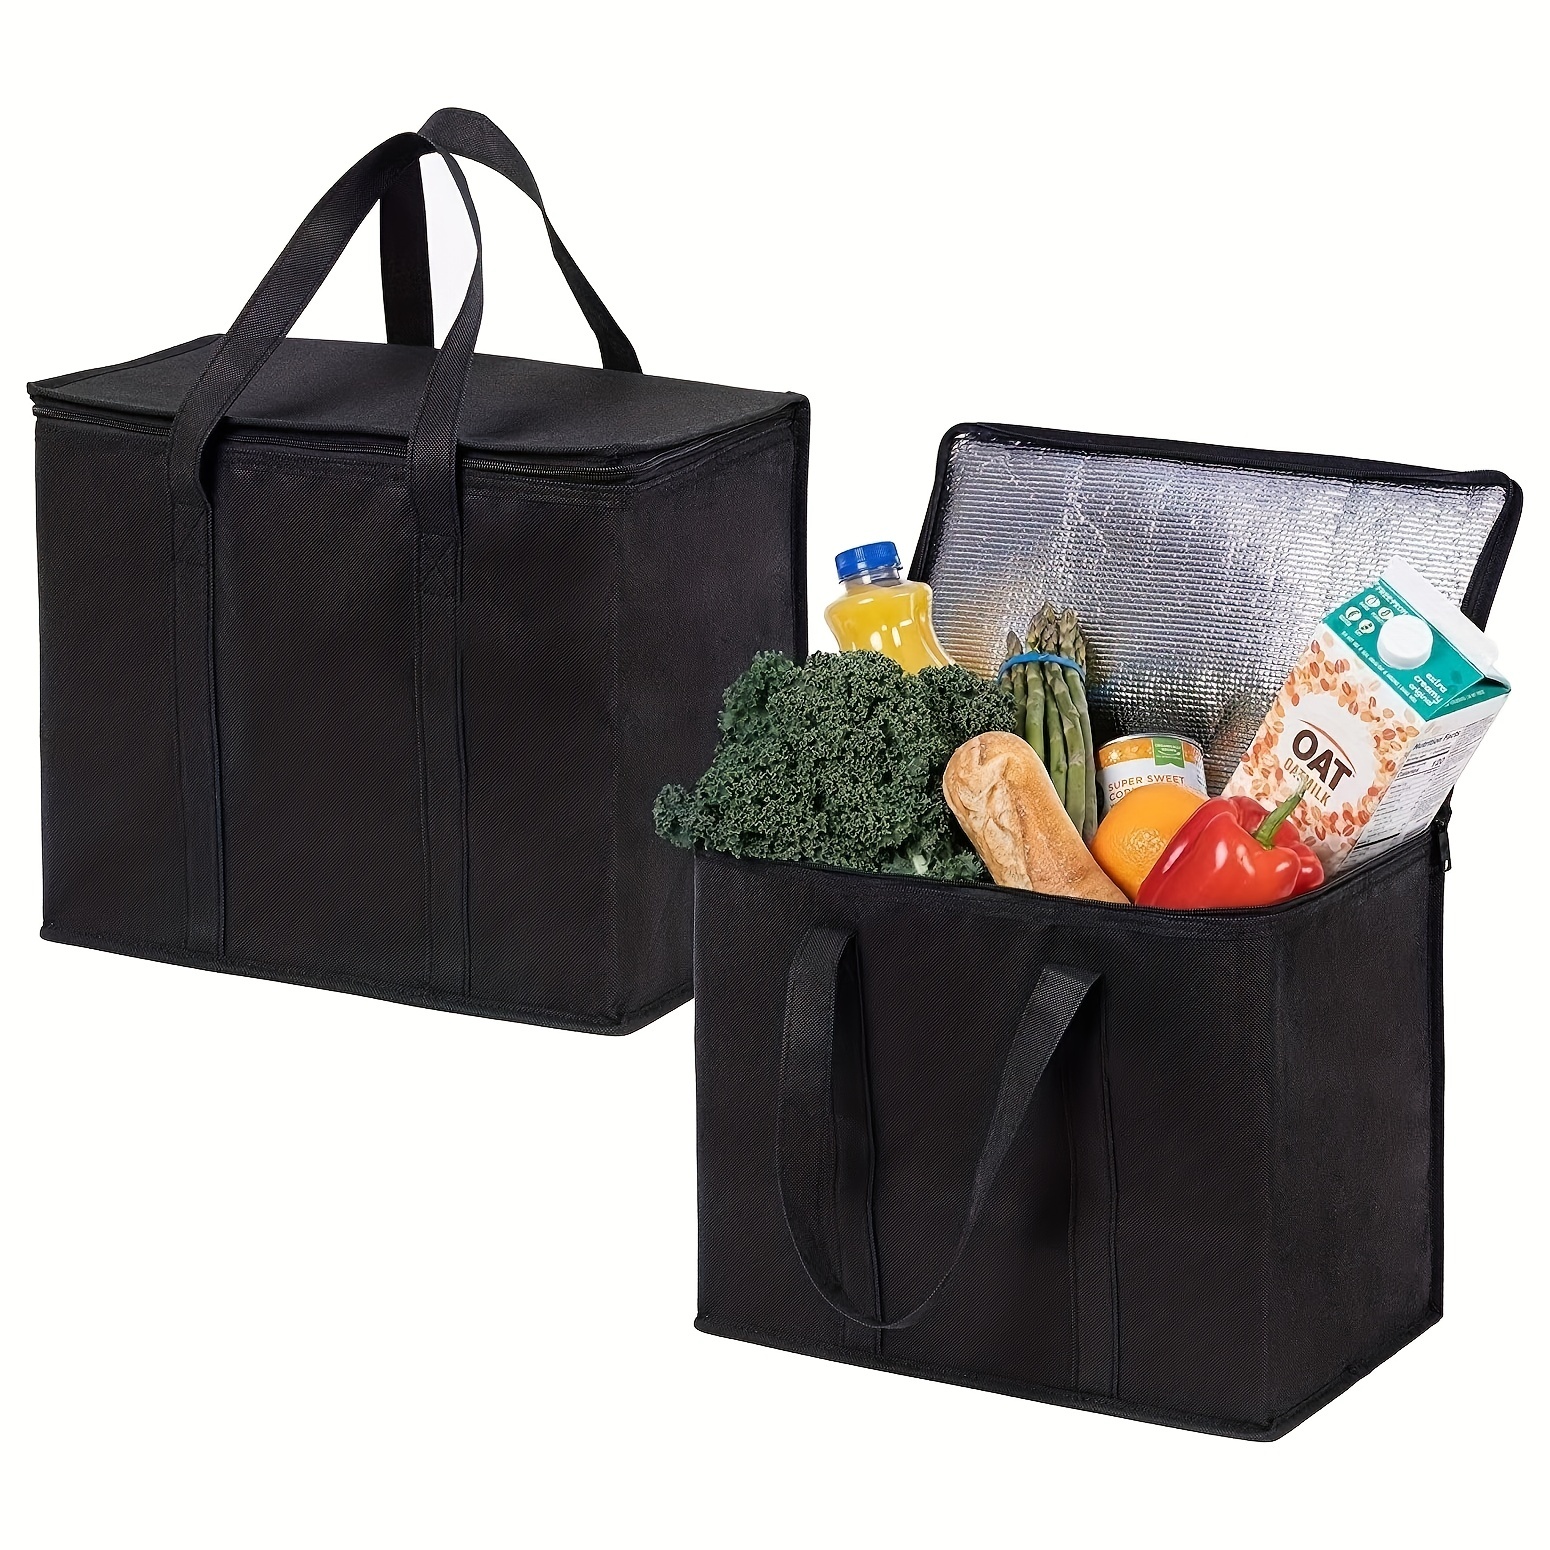 

Xl-large Insulated Bag: Keep Food Hot & Cold For Hours - Reusable Grocery Tote, Soft Cooler Bag, Lightweight & Sturdy Zipper For Hotel/commercial